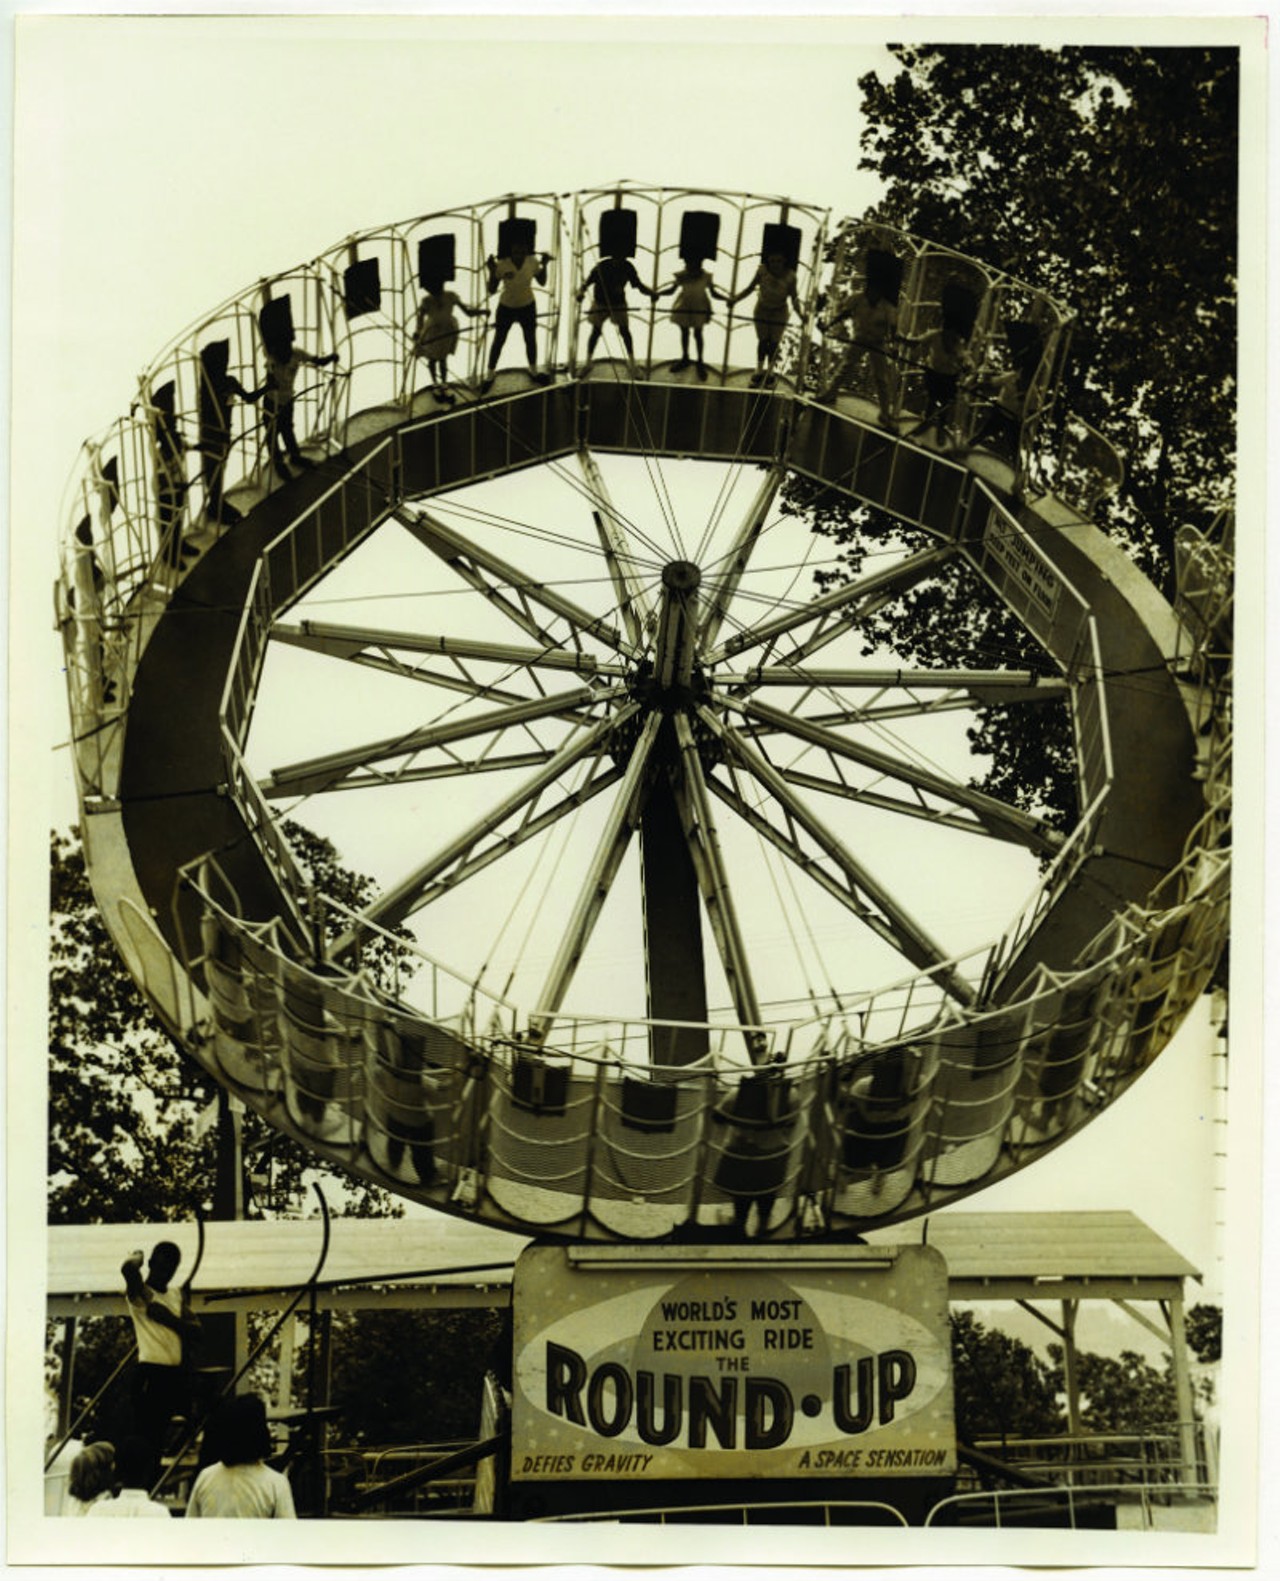 Pretend to tempt your fate on the oblong Ferris wheel at Chain of Rocks Amusement Park.From 1927 until its closing in 1978, the Chain of Rocks Amusement Park offered amusement and fun in north St. Louis along the former path of Route 66 at the western entrance to the Chain of Rocks Bridge. Along with swimming pools and a roller skating rink, Chain of Rocks offered a multitude of classic amusement park rides, including a roller coaster (the Comet), a haunted house, a Whip, a Tilt-O-Whirl, and a Sky-Lift, which offered a wonderful view of the mighty Mississippi. Its most curious ride was the Swooper, an oblong Ferris wheel designed to make riders feel like they&#146;d be plunked into the Mississippi River each time their car swooped down. The park thrived in north St. Louis until the late 1960's, when a declining school population began to affect attendance. With a Six Flags newly constructed far to the west, Chain of Rocks closed for good in 1978.Photo courtesy of the Missouri History Museum, St. Louis.